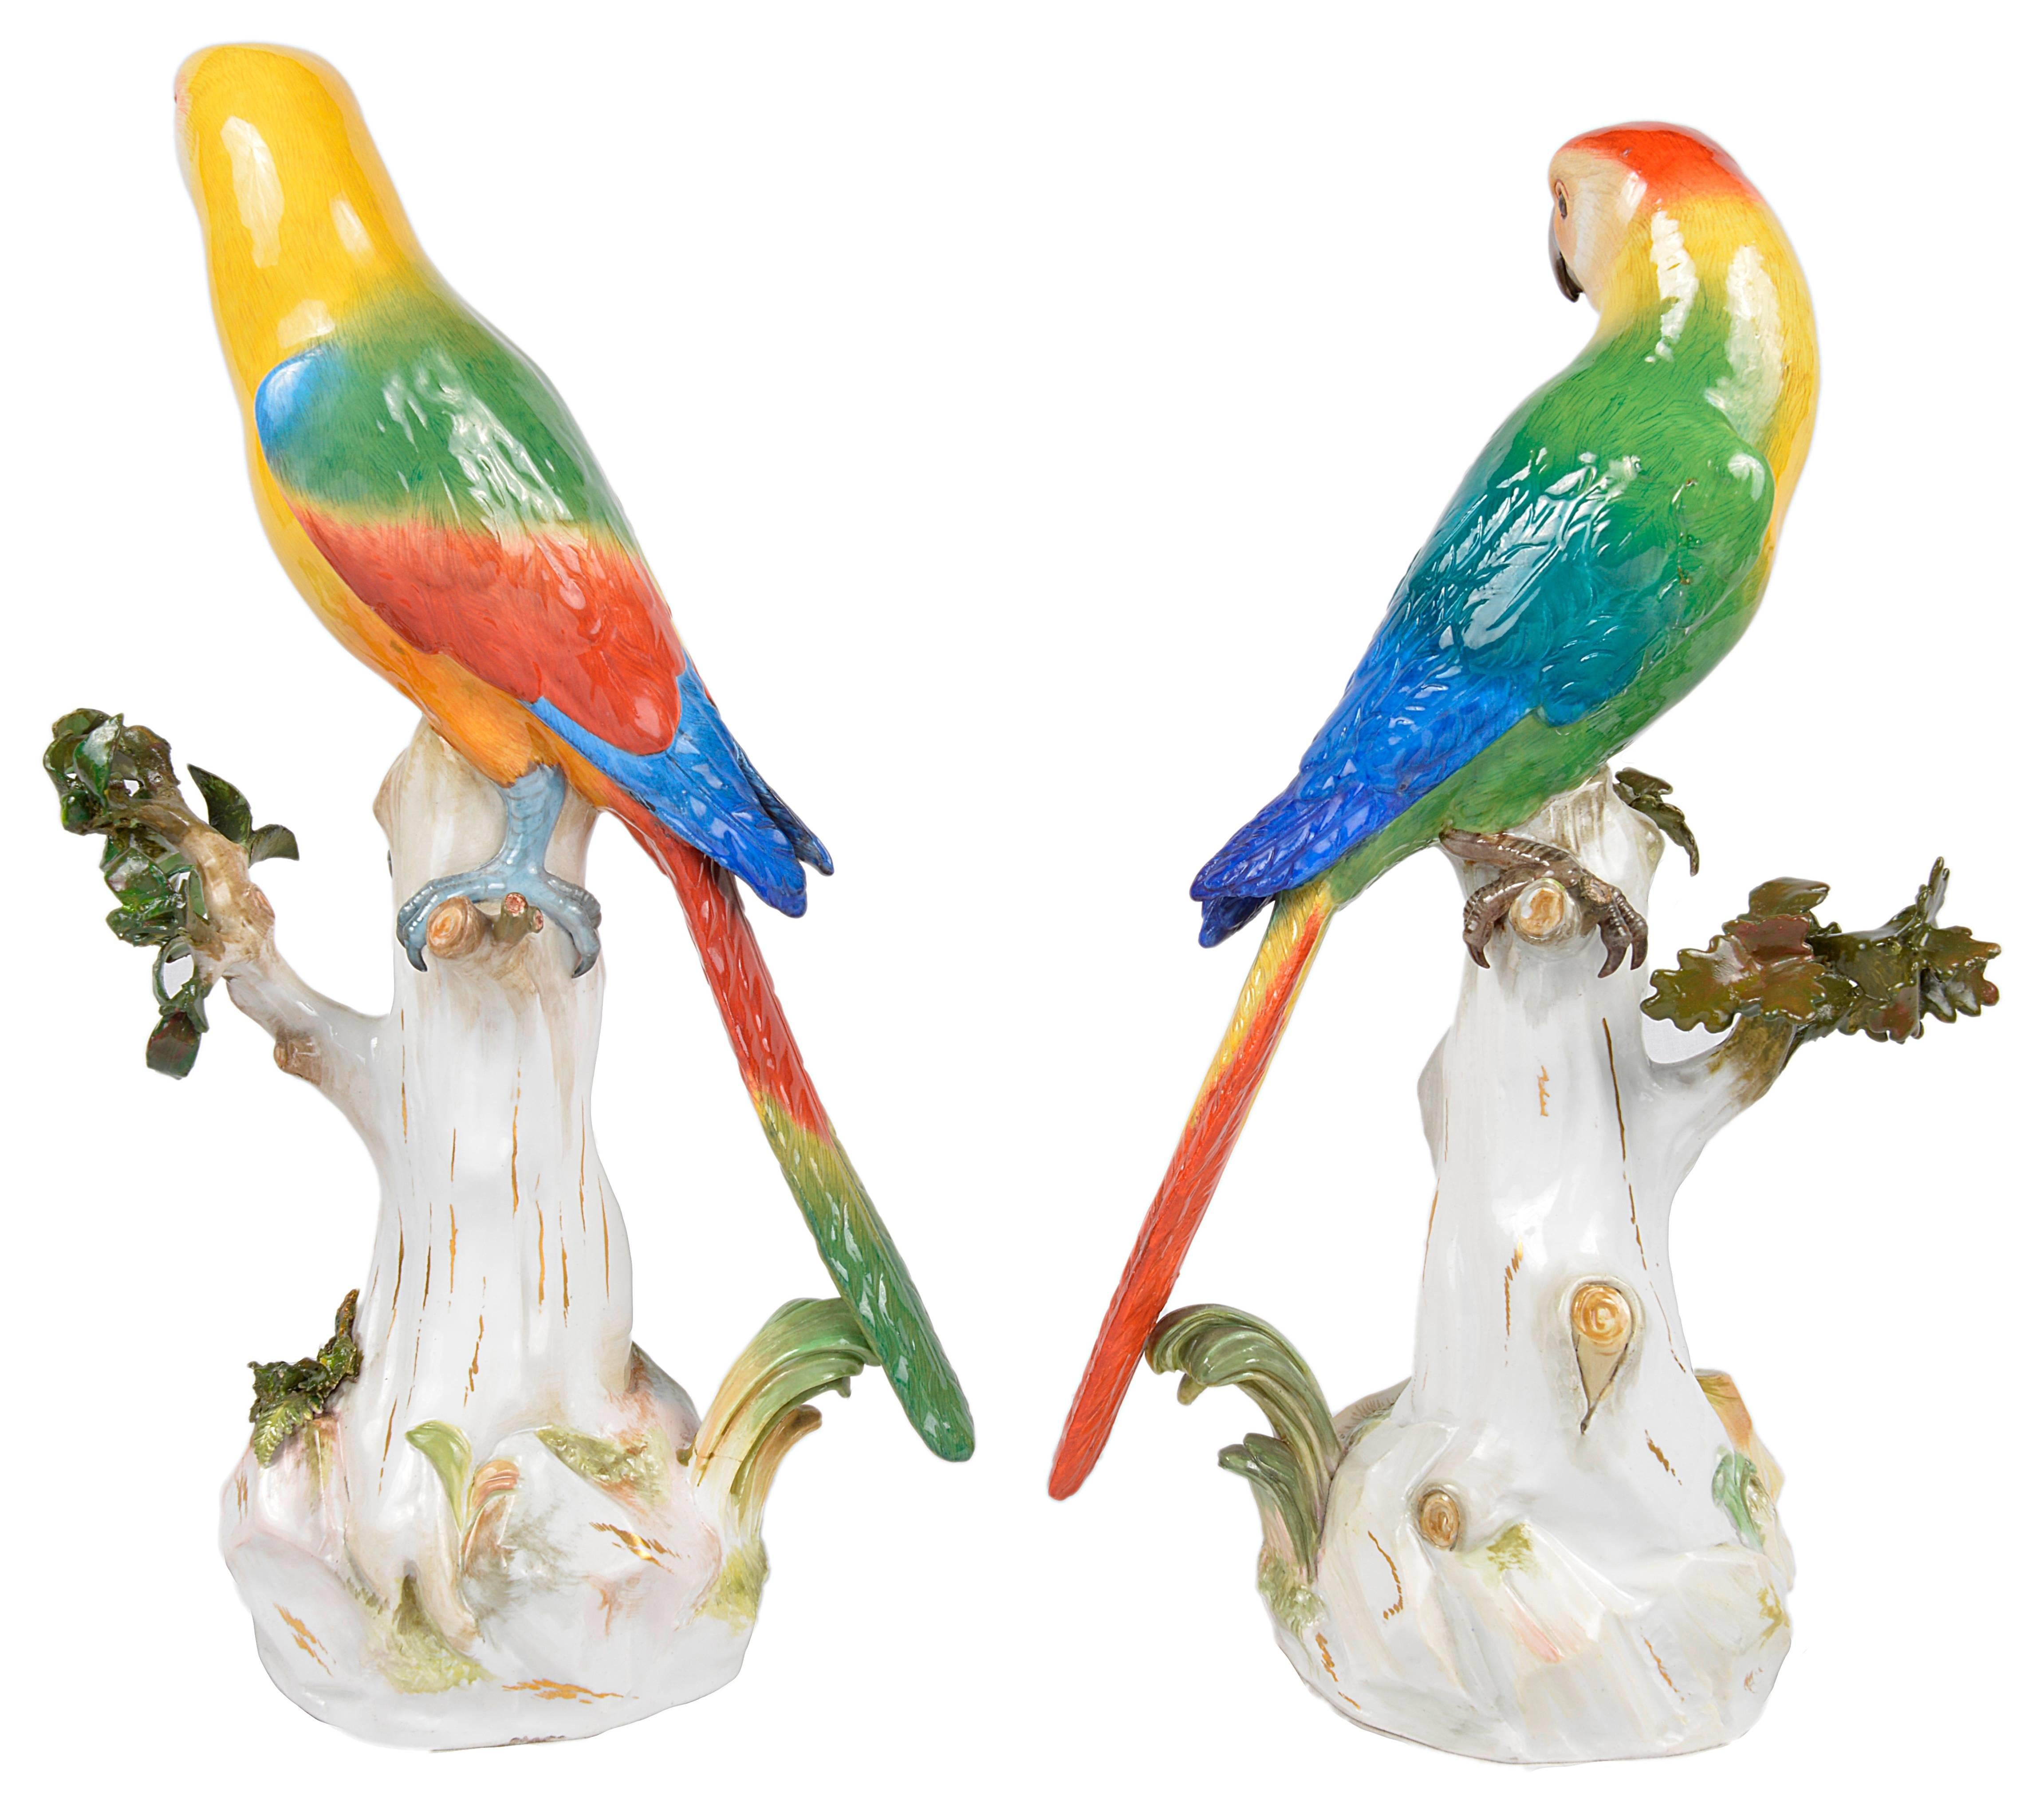 A striking pair of mid-19th century Meissen porcelain parrots with wonderful bright colors perched on a tree trunk.
